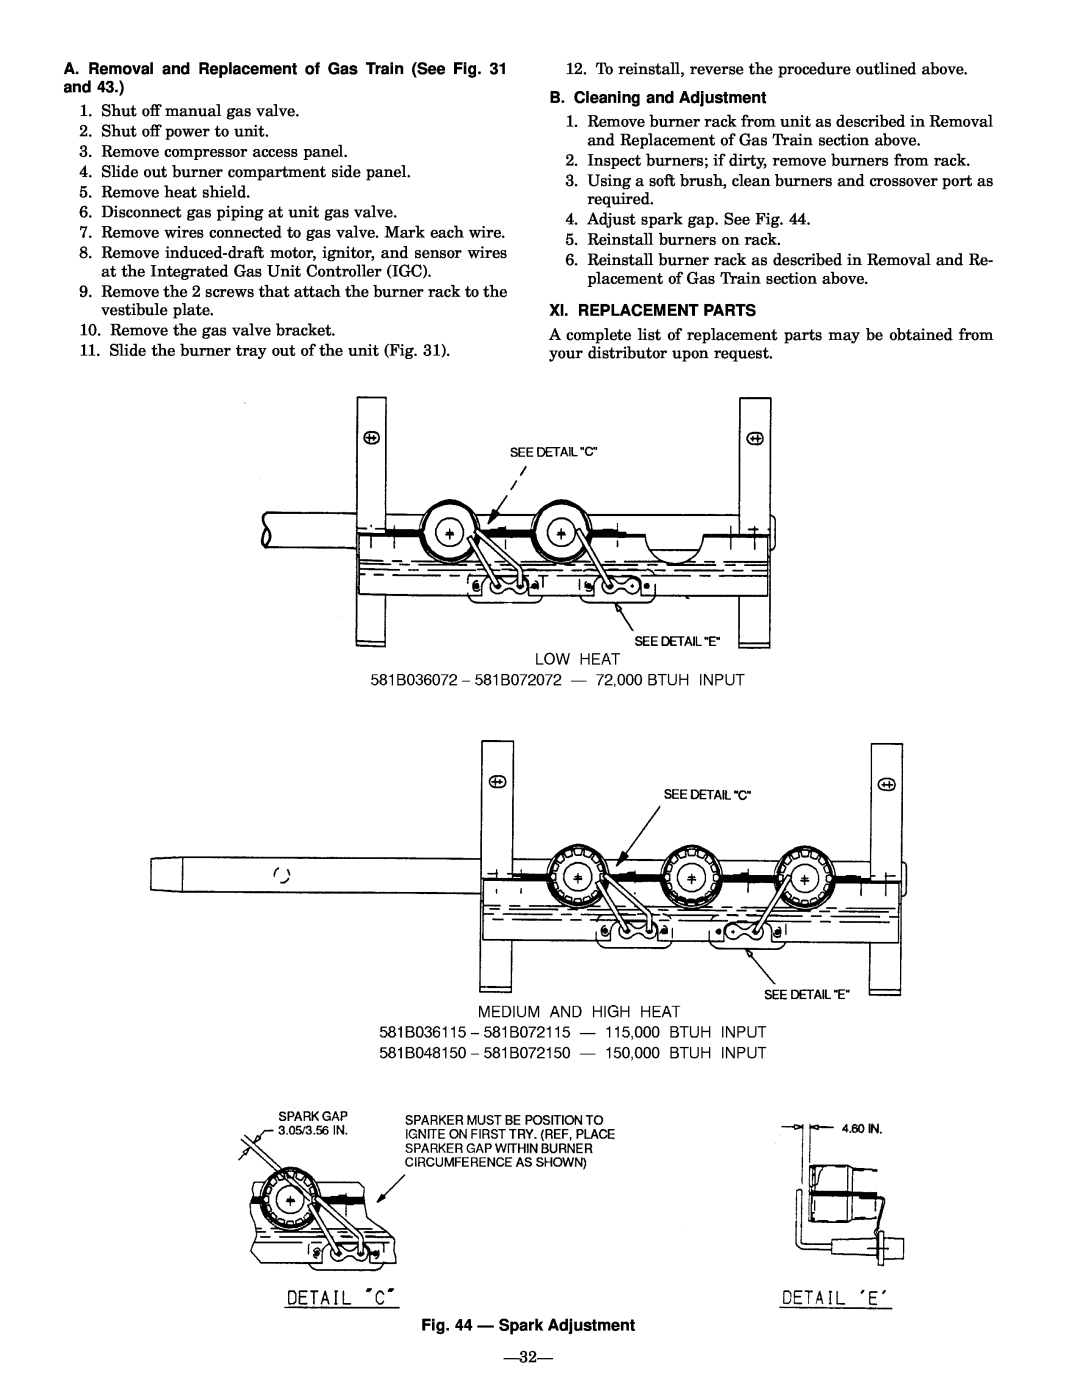 Bryant 581B installation instructions B.Cleaning and Adjustment, Xi. Replacement Parts, Ð Spark Adjustment 